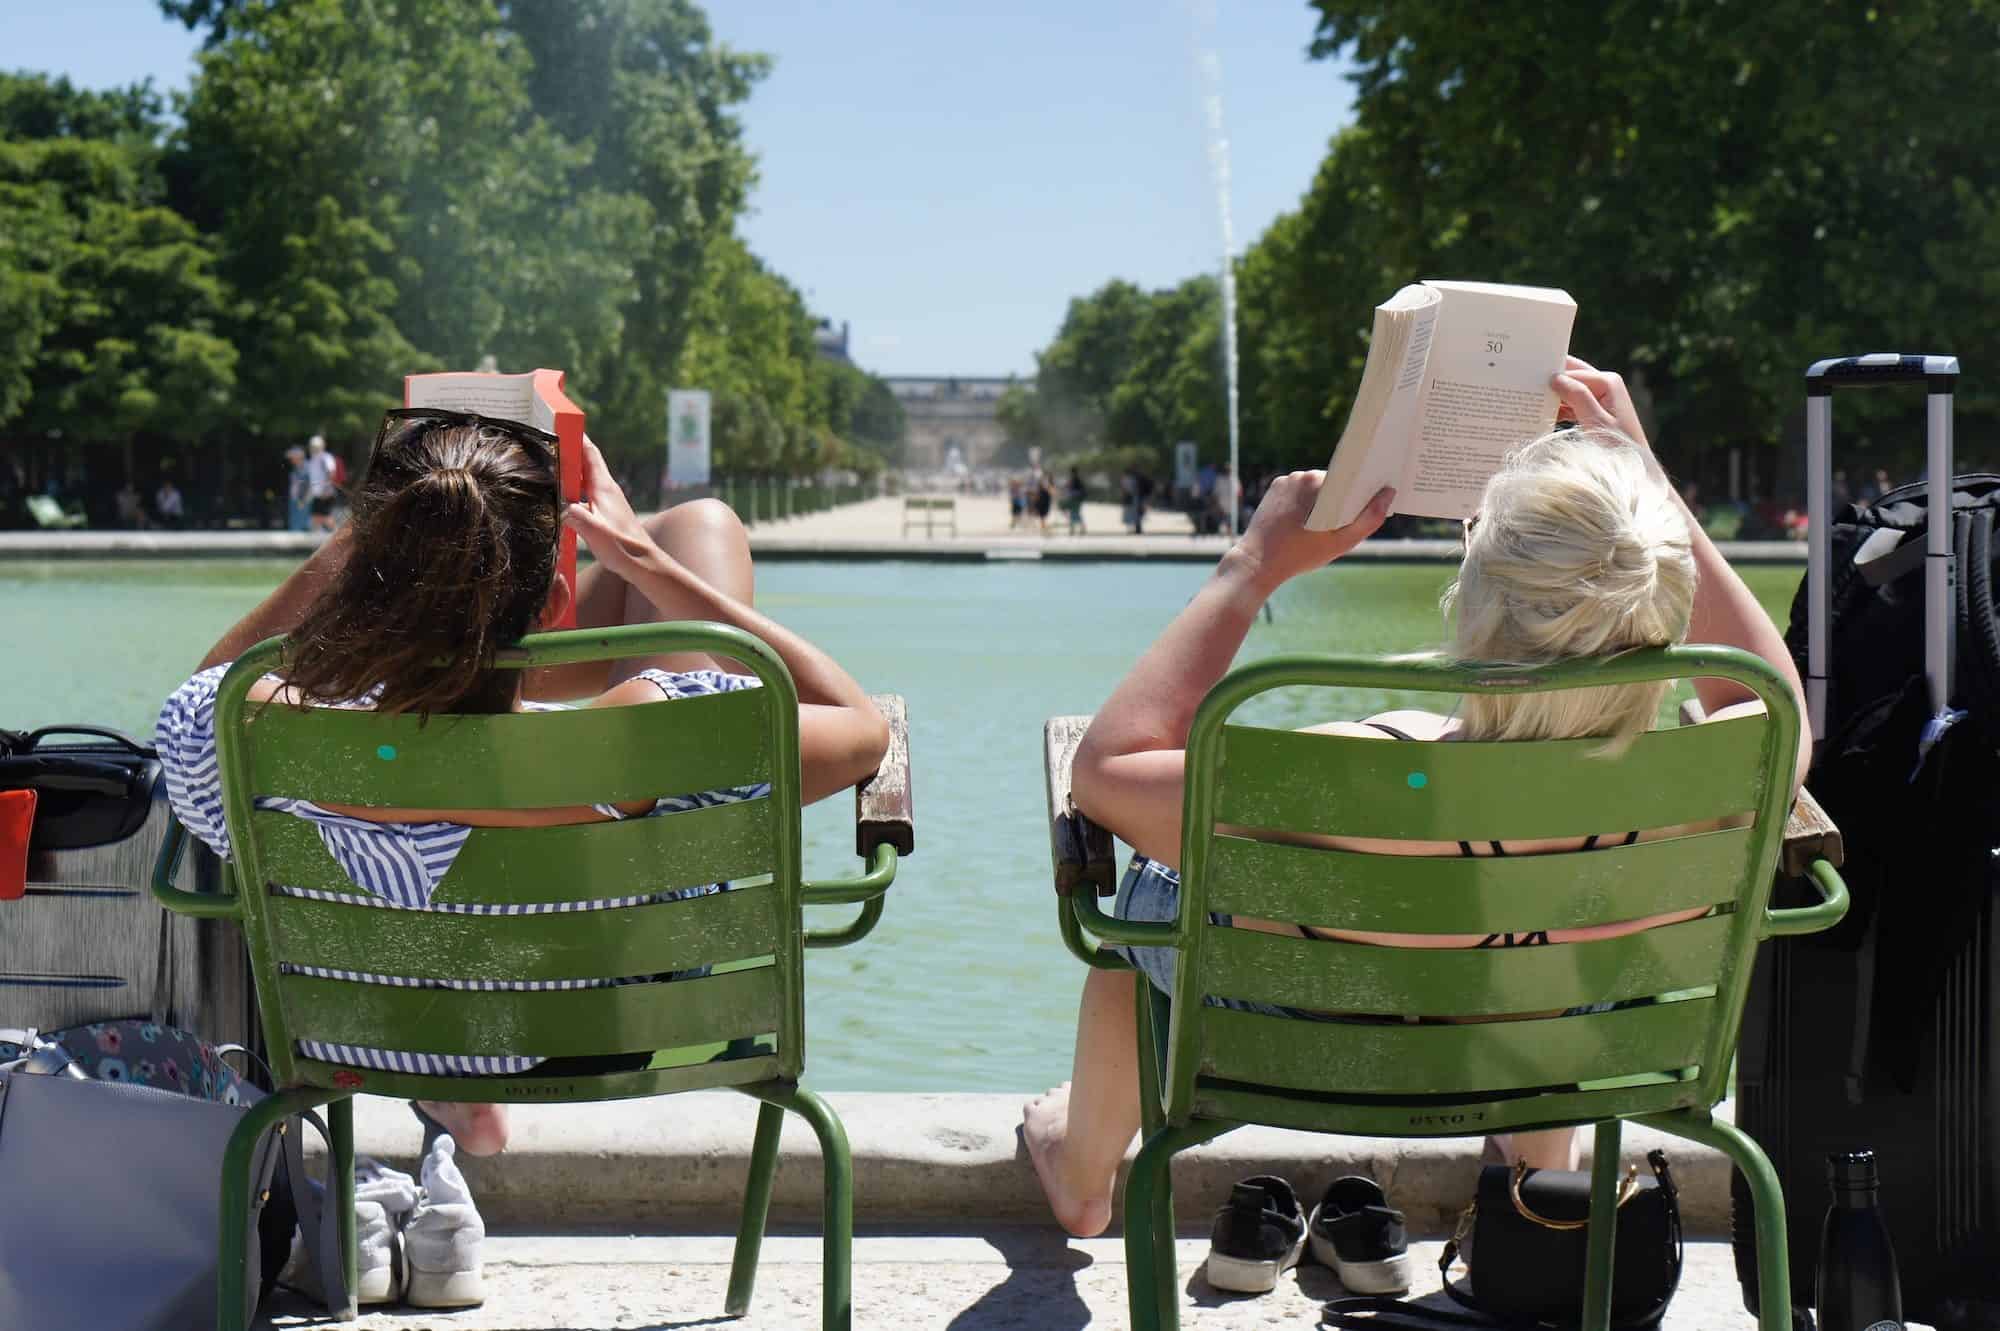 Two women leaning back in chairs by the water feature at the Jardin des Tuileries in Paris while reading books in the sunshine. They probably said "bonjour" even if they don't know one another.